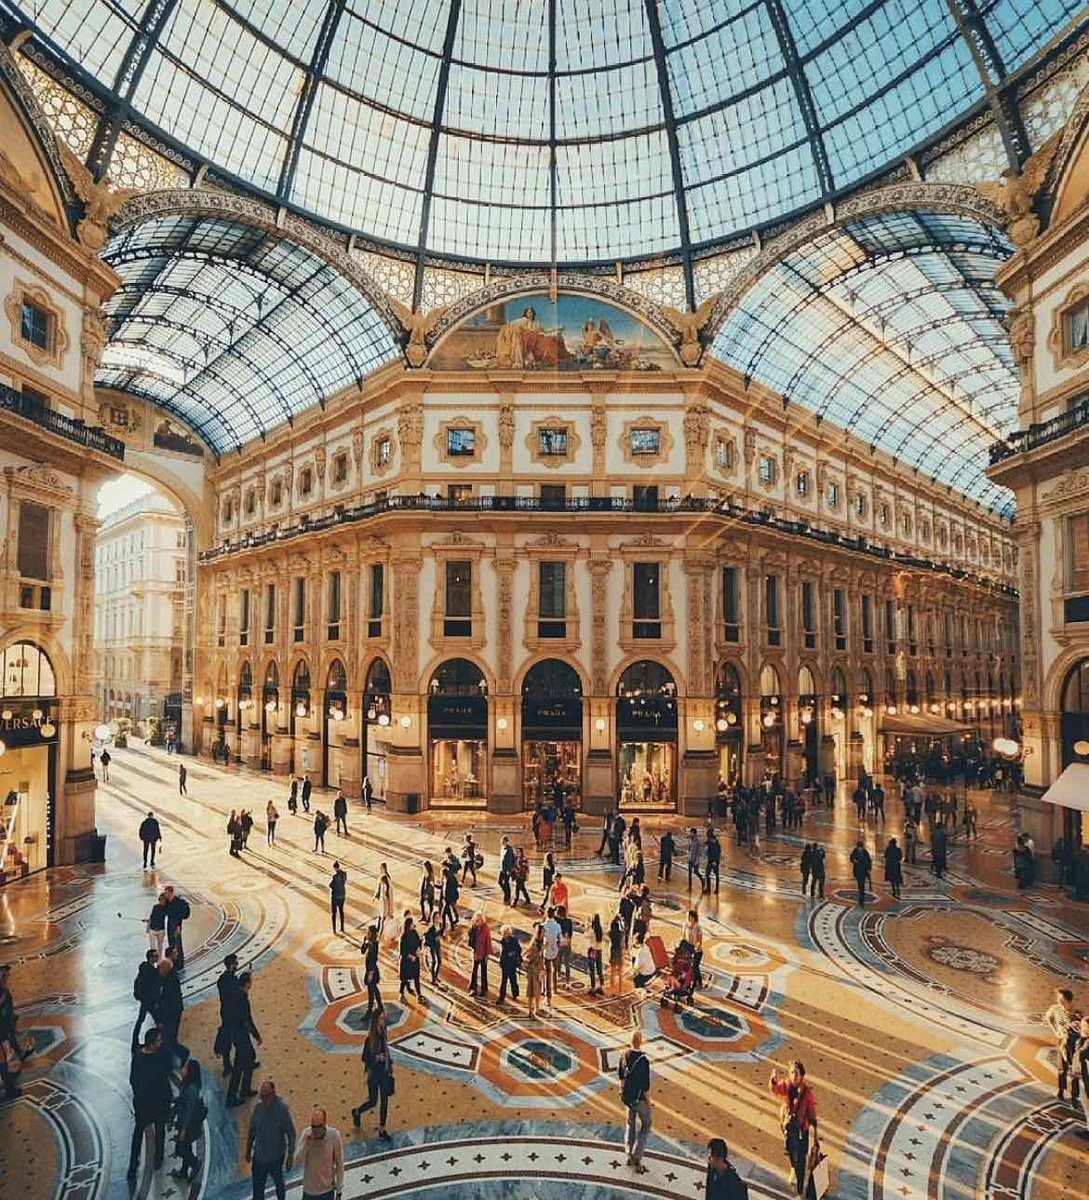 Exploring the fashion capital of the world! Milan never fails to impress with its stunning architecture, delicious cuisine, and vibrant culture. #Milano #Italy #Travel #cityofdesign #culturalheritage #StreetStyle